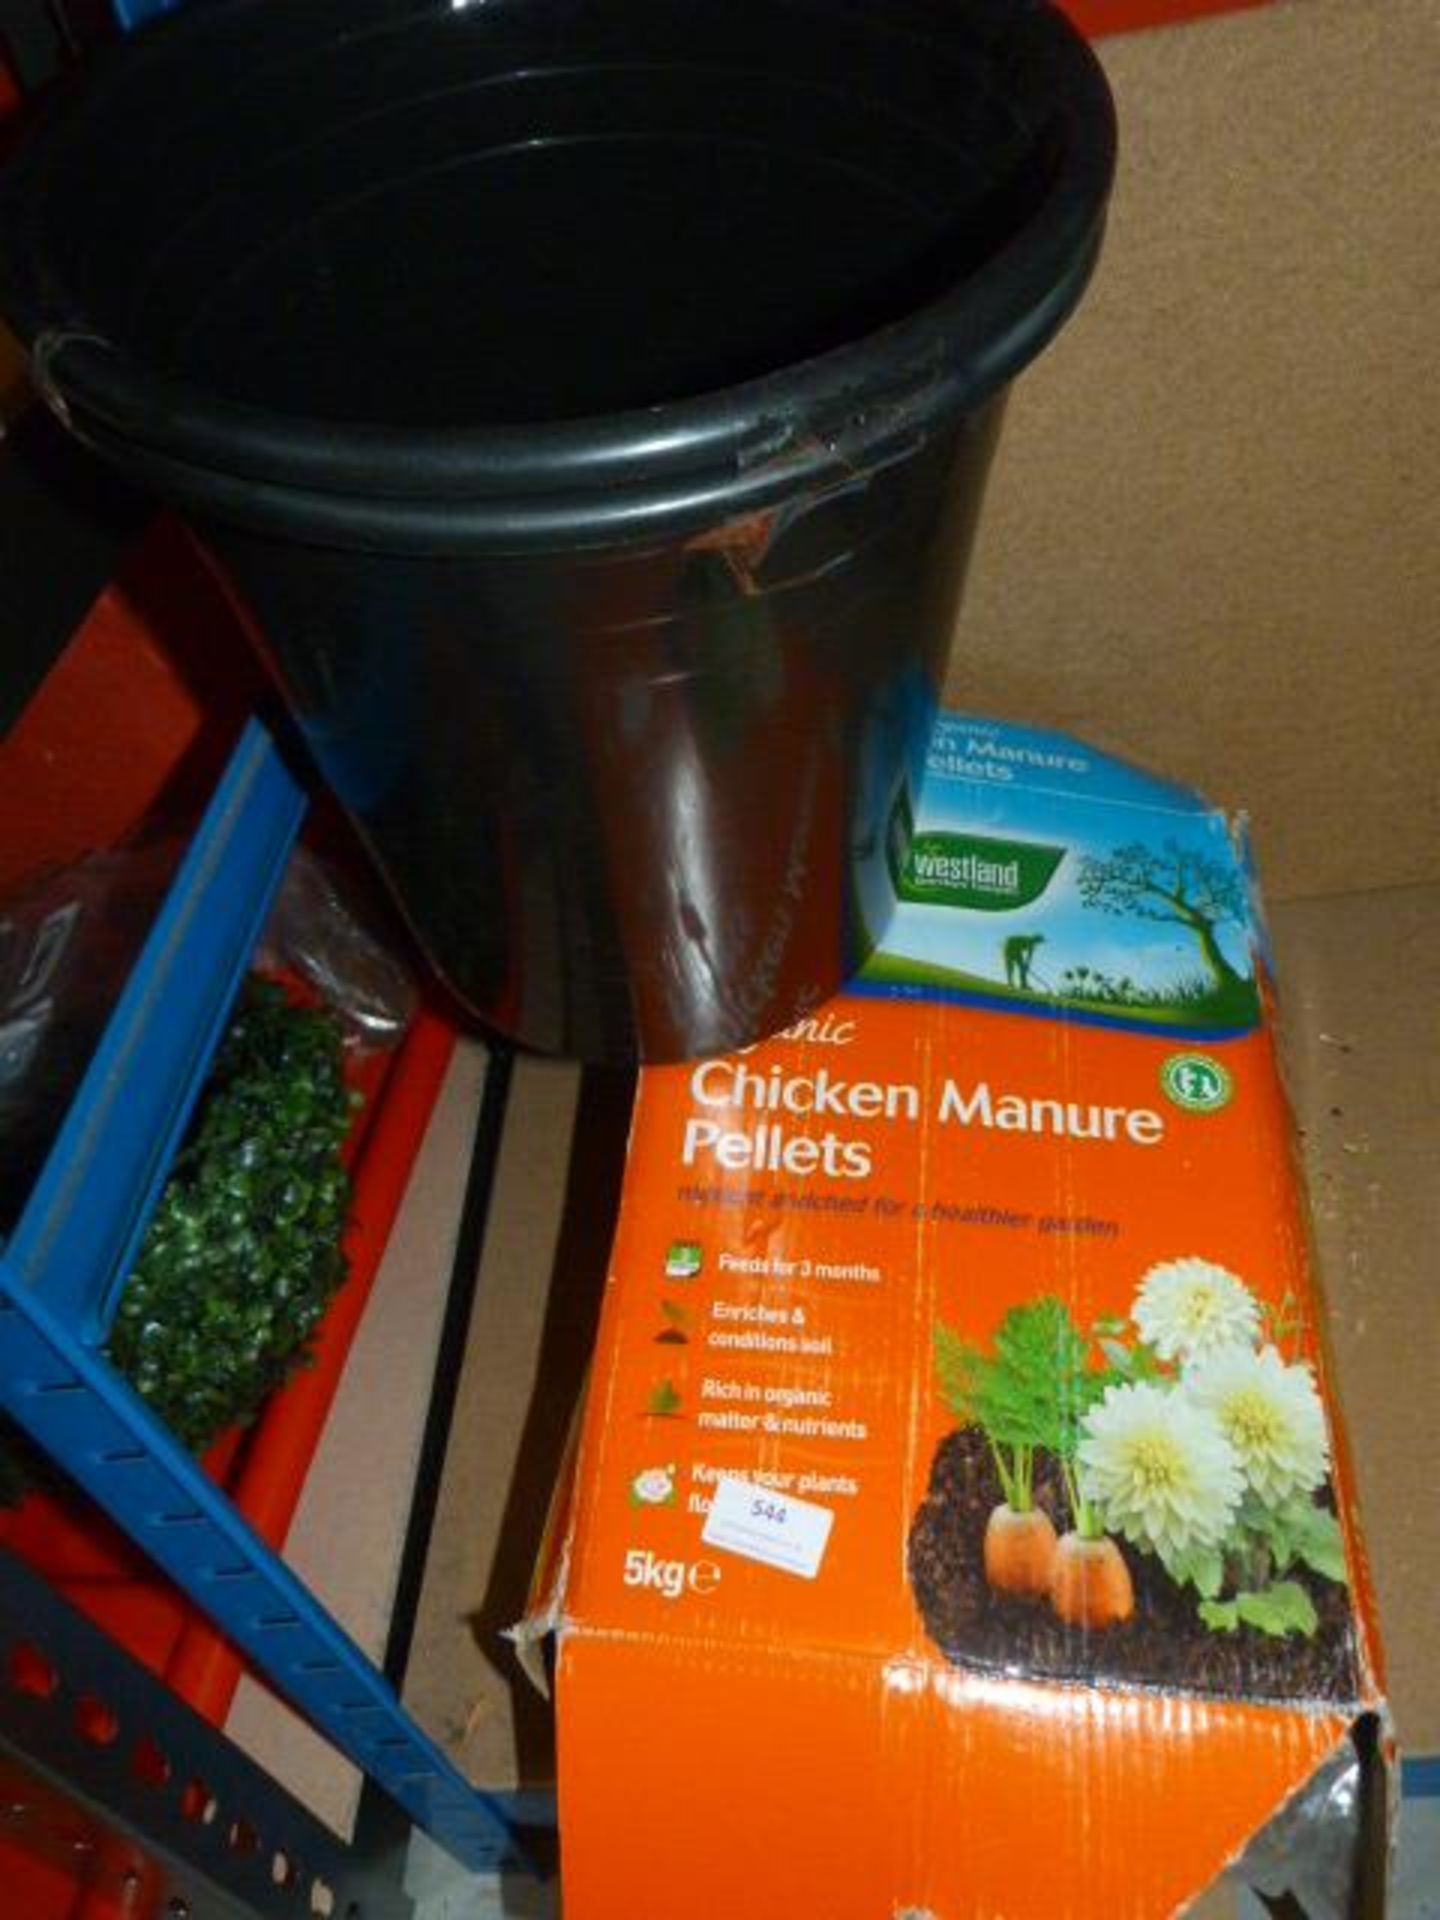 *Two Black Buckets and 5kg Tub of Chicken Manure Pellets